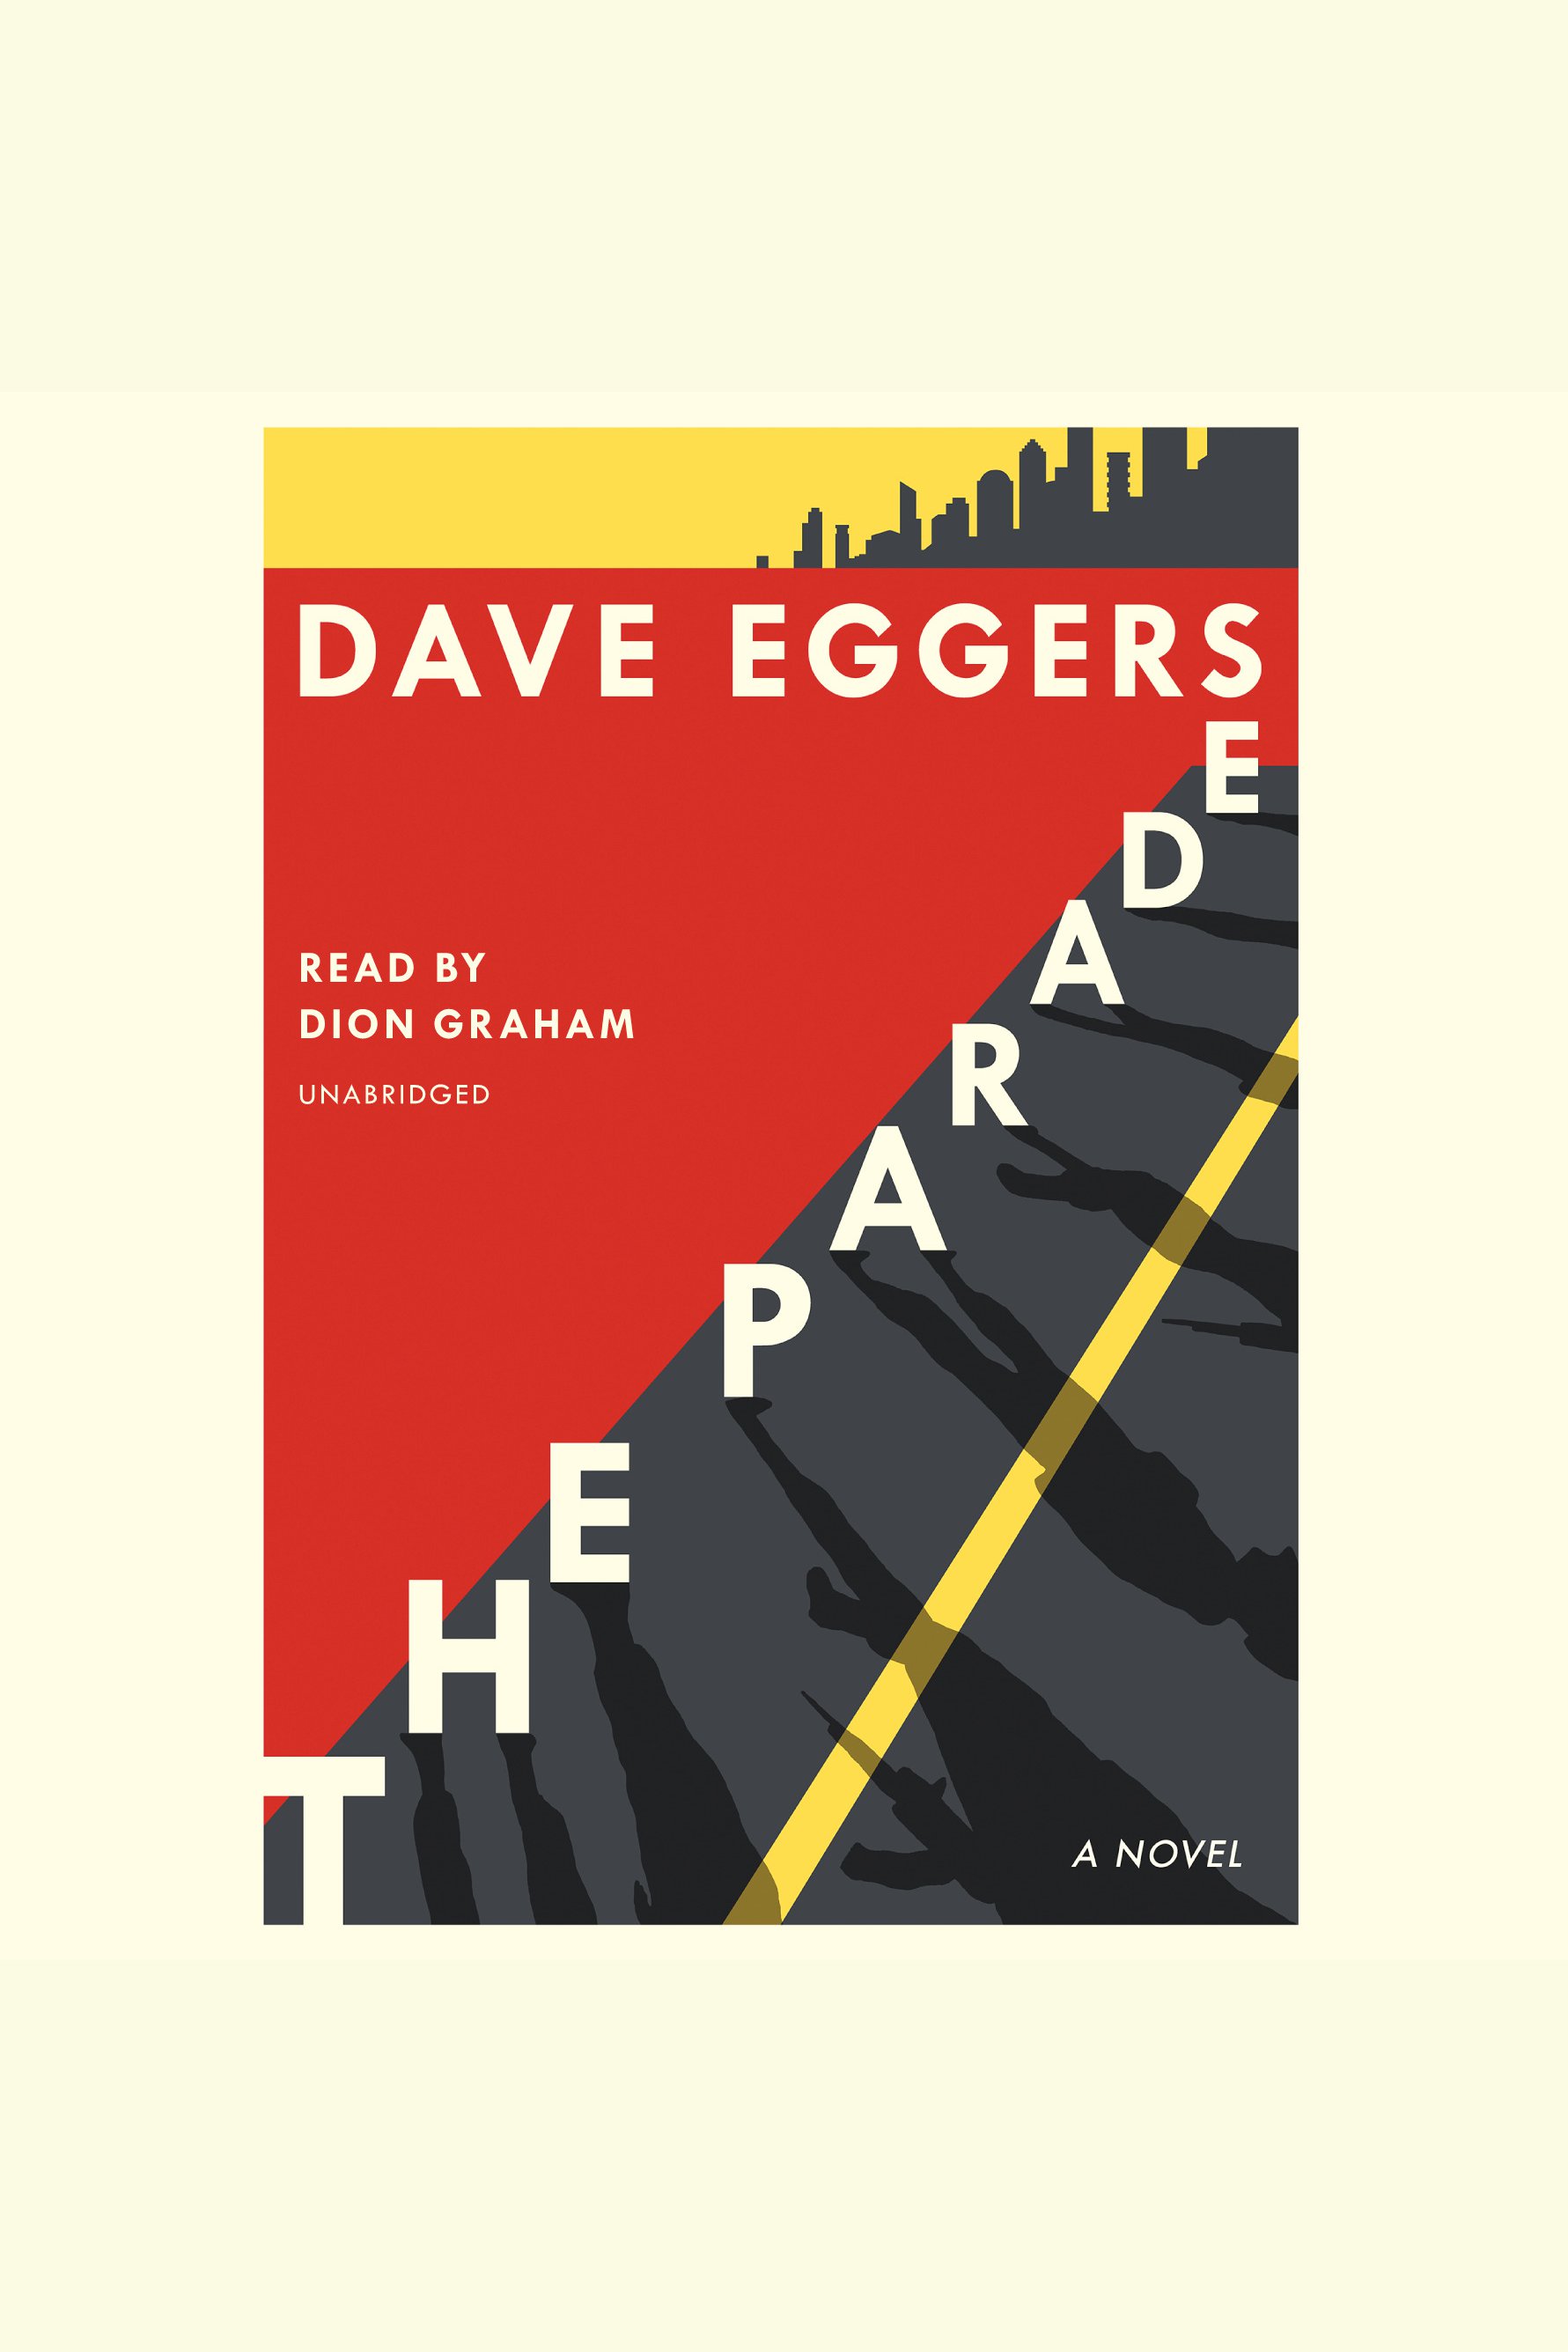 The parade cover image